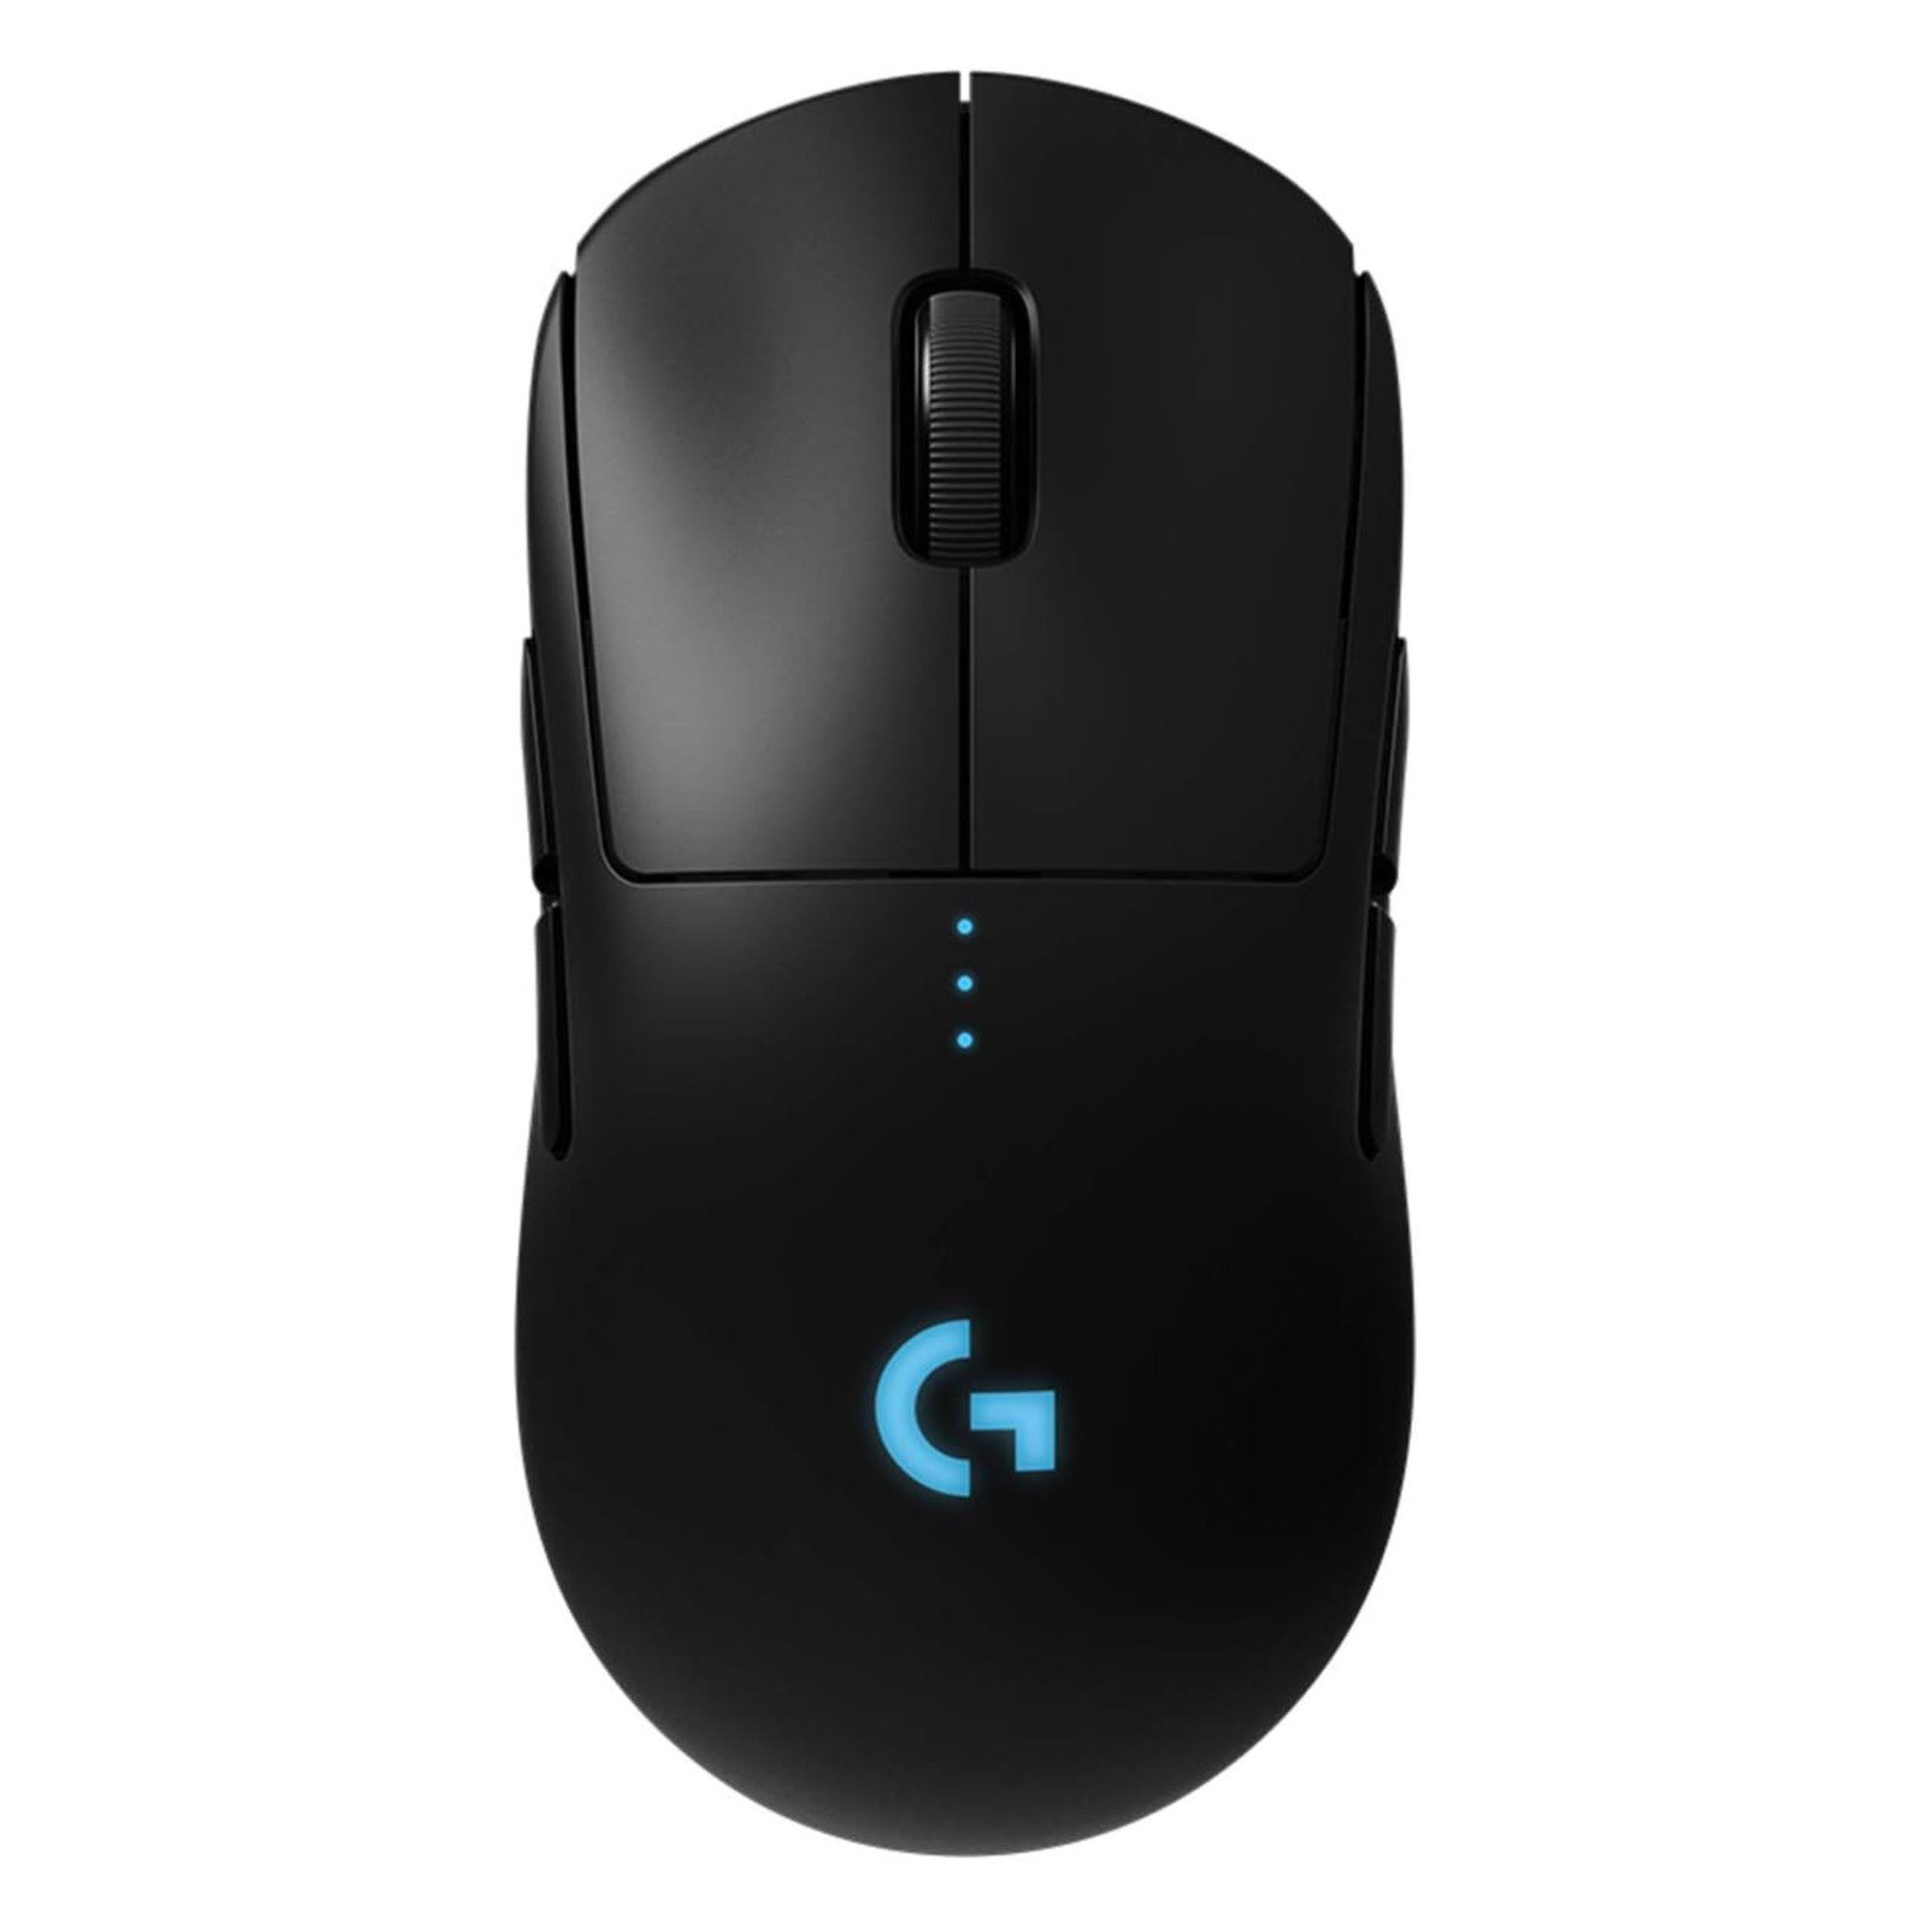 Logitech G Pro Wireless Gaming Mouse with Esports Grade Performance (Black)